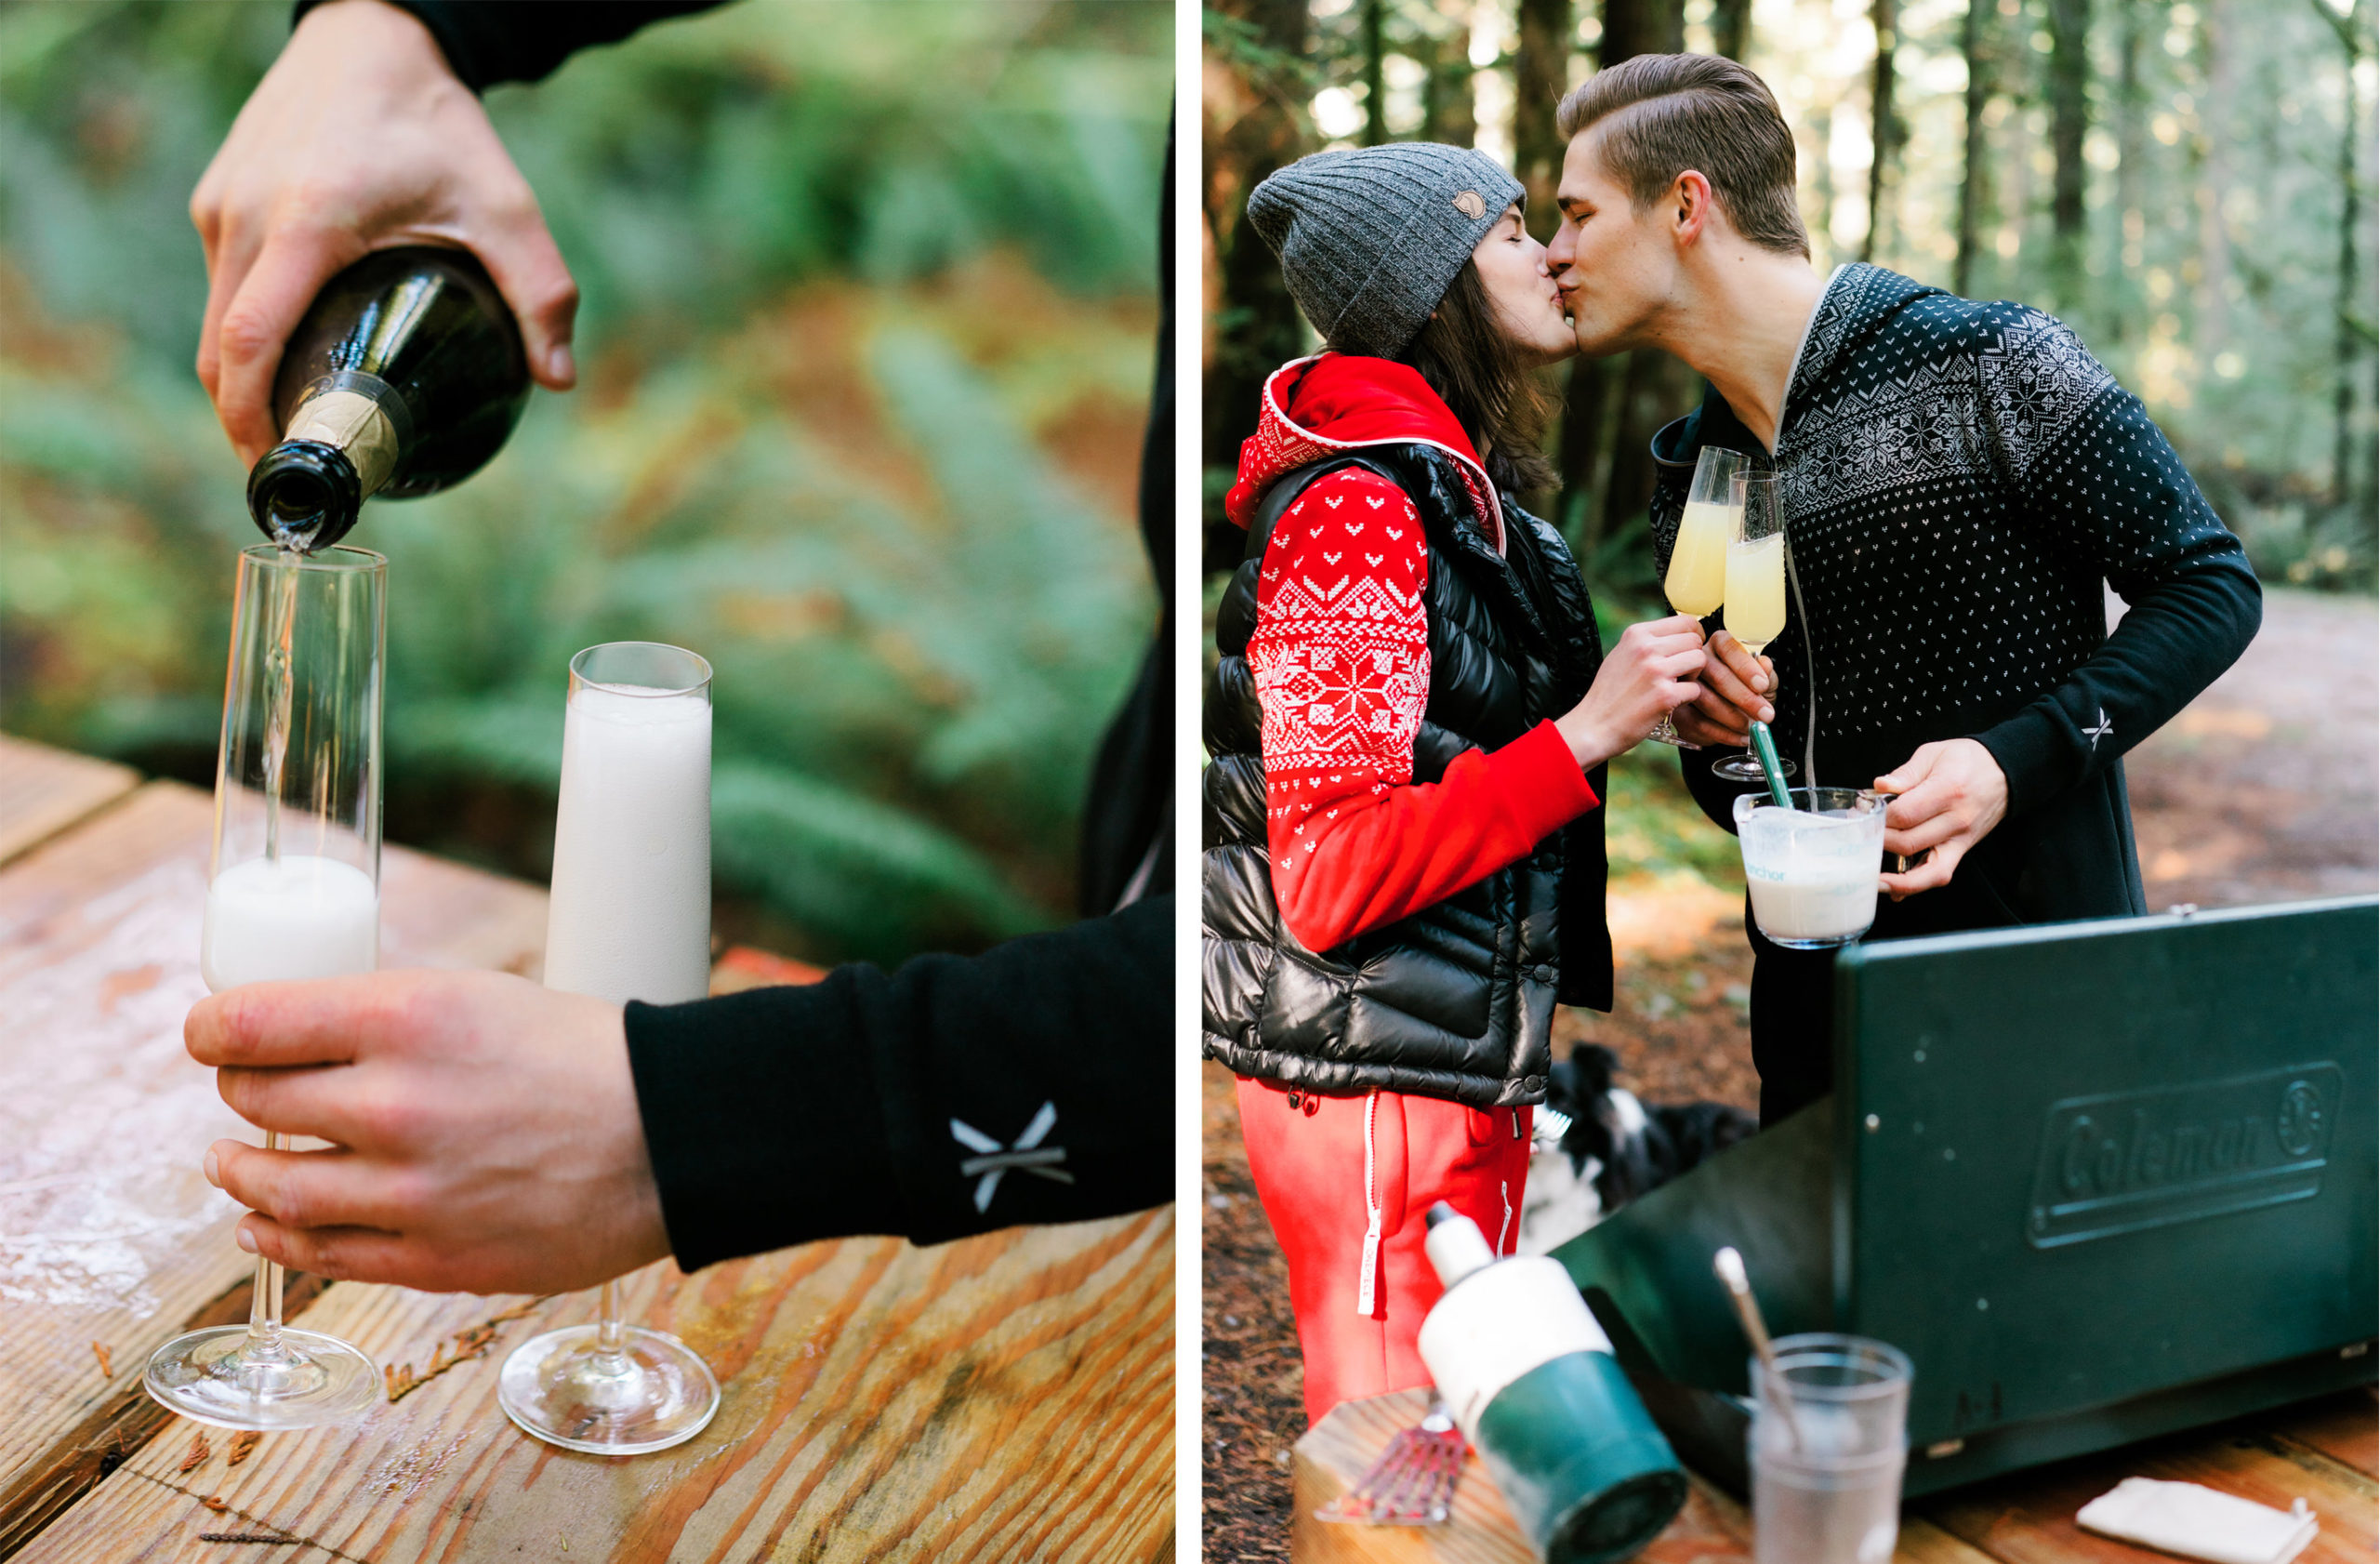 Seattle engagement photographer: Champagne to start the day off? Yes please!